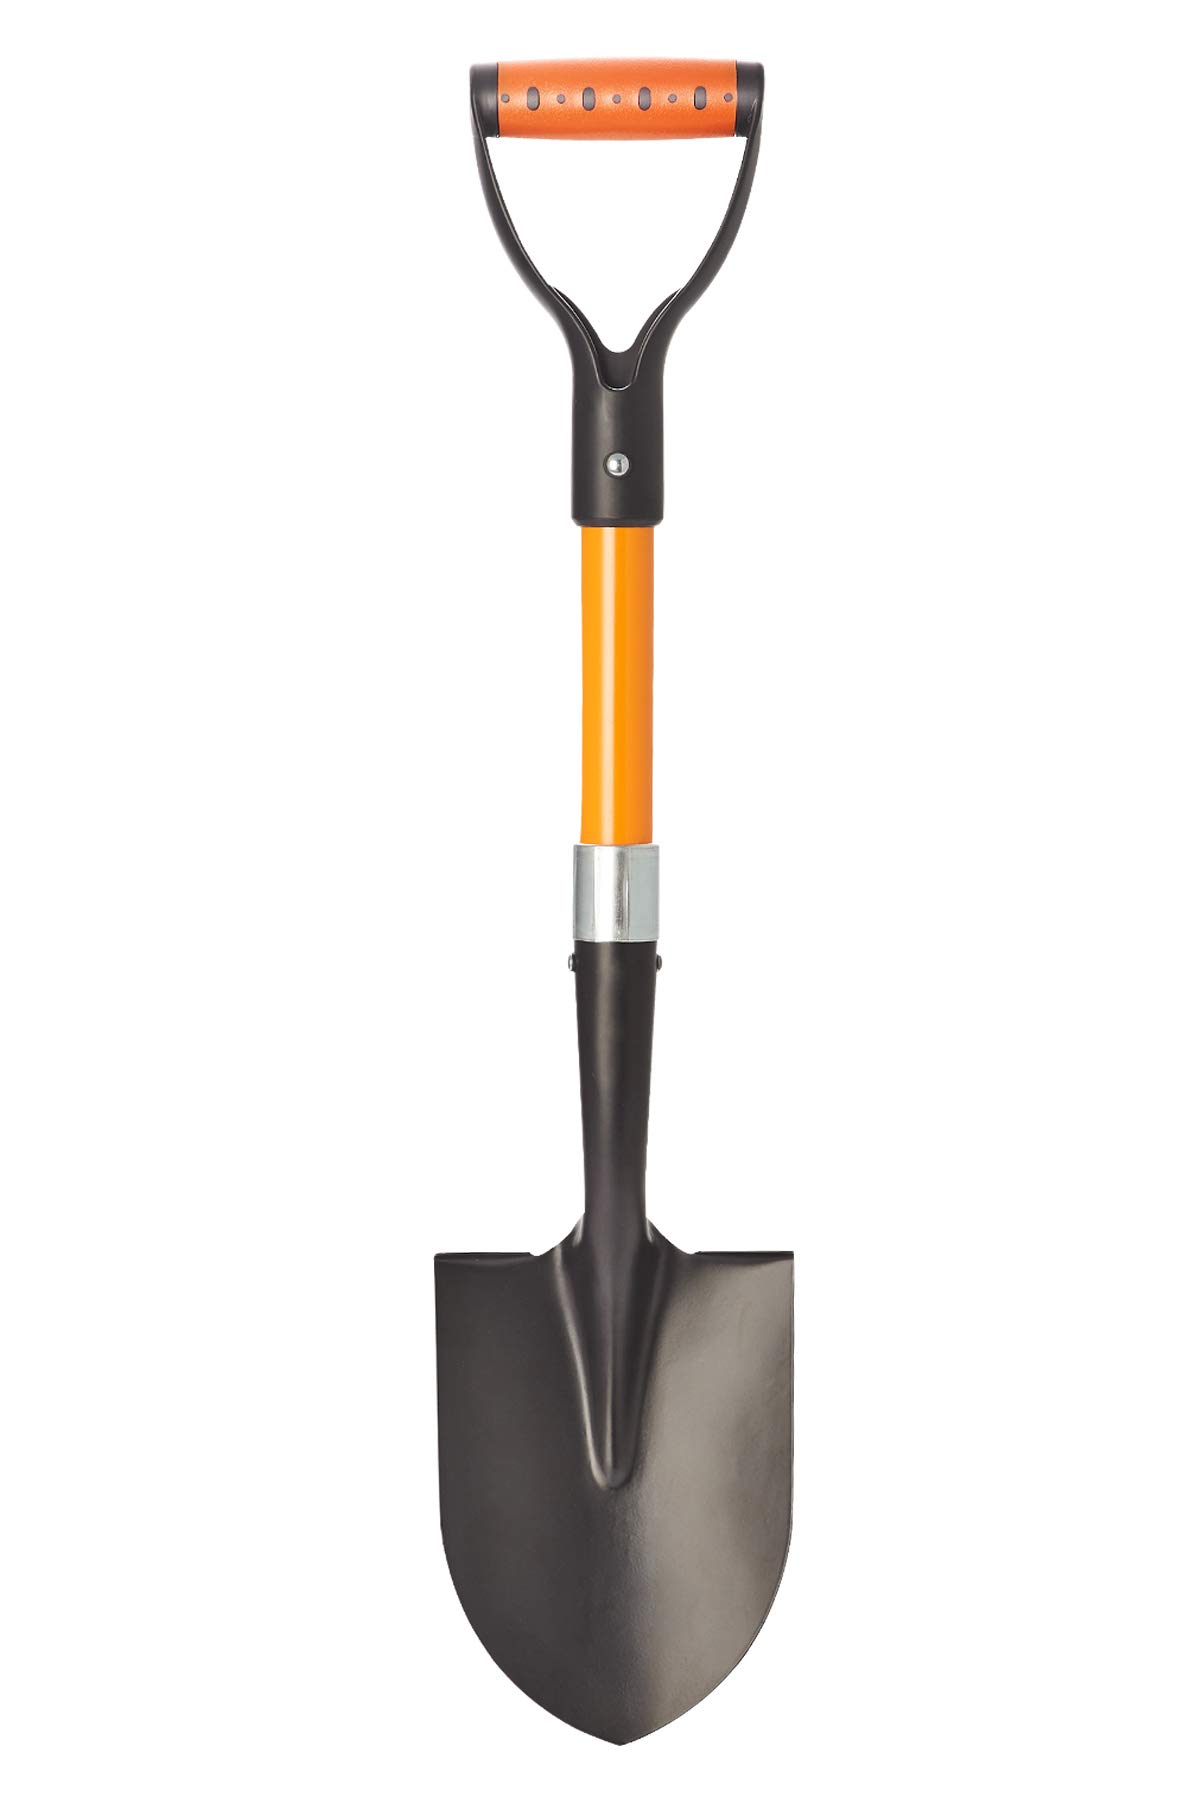 Small Garden Shovel Mini Kids Digging Shovel with Overall Length 28 inches Shovel for Digging, Beach Shovels. Gardening Tools with D-Handel